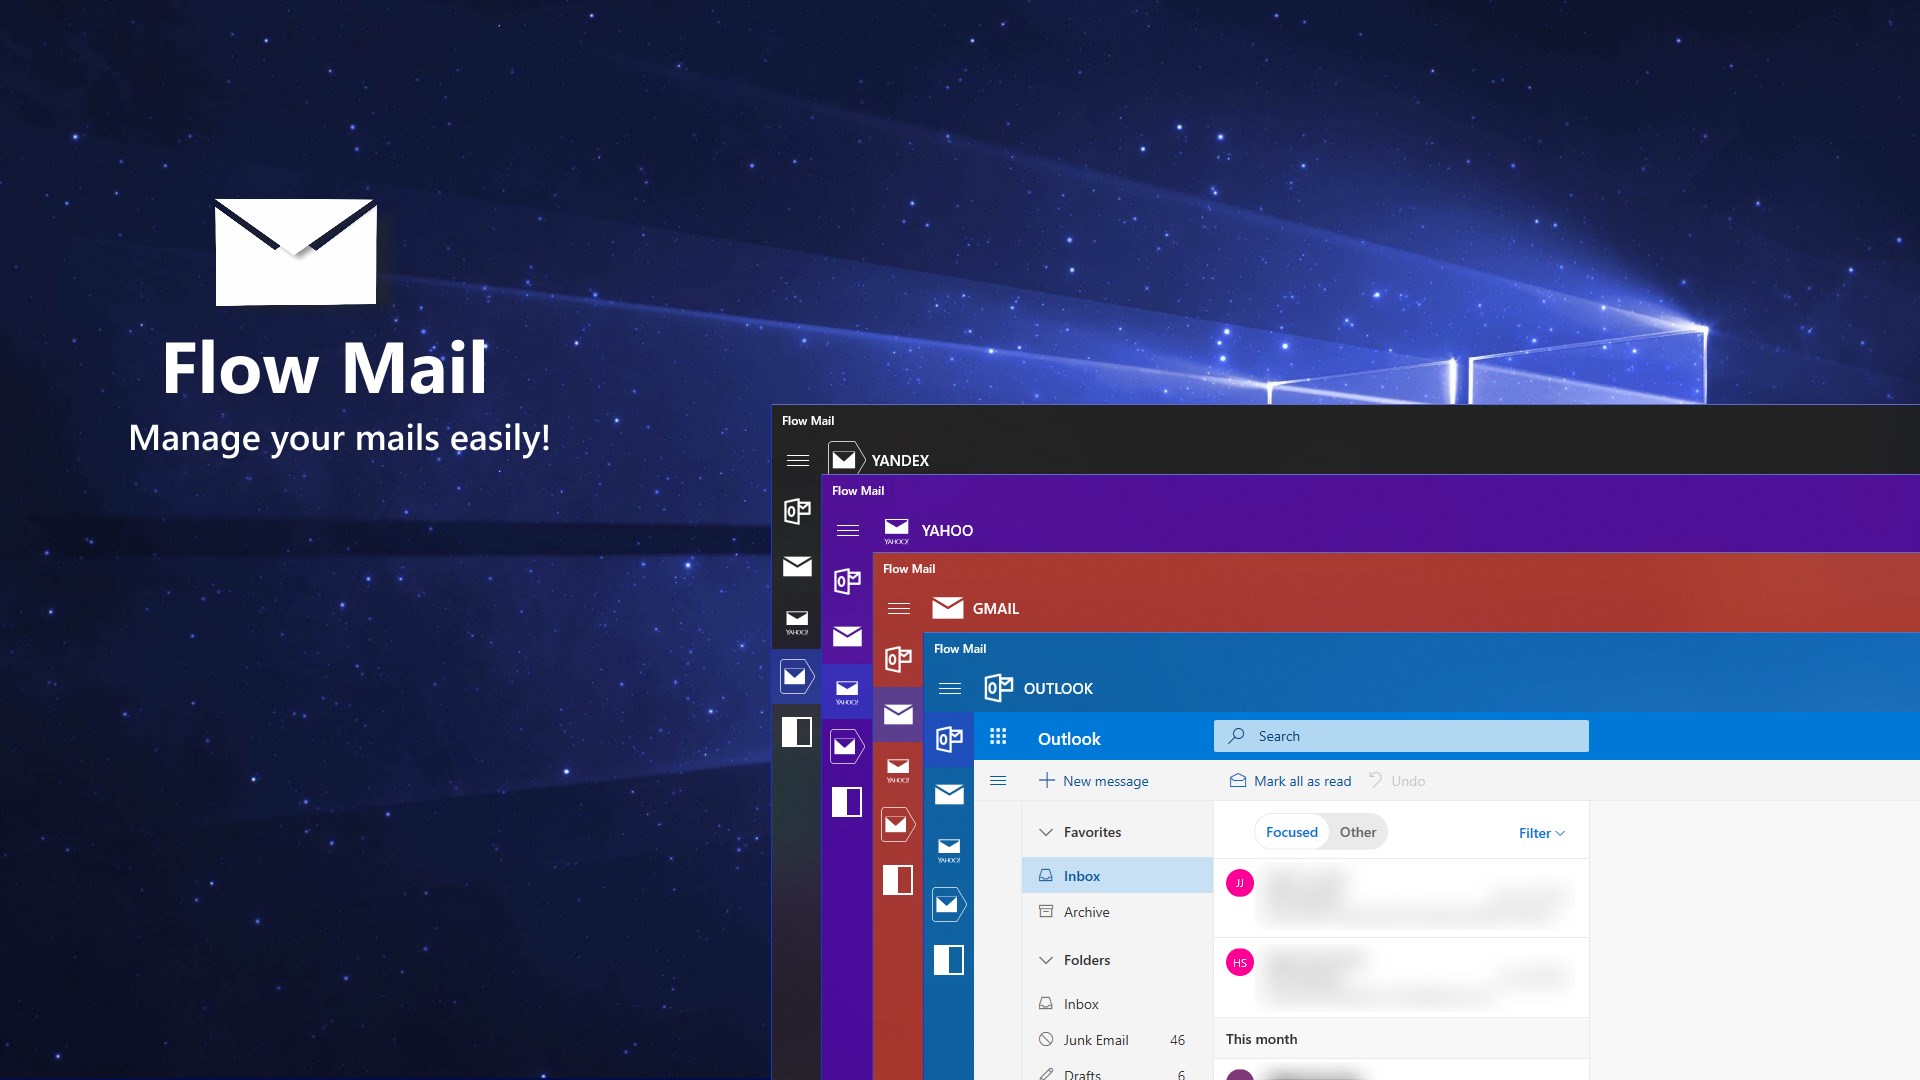 Get Flow Mail Outlook Gmail Yahoo Icloud And More Microsoft Store